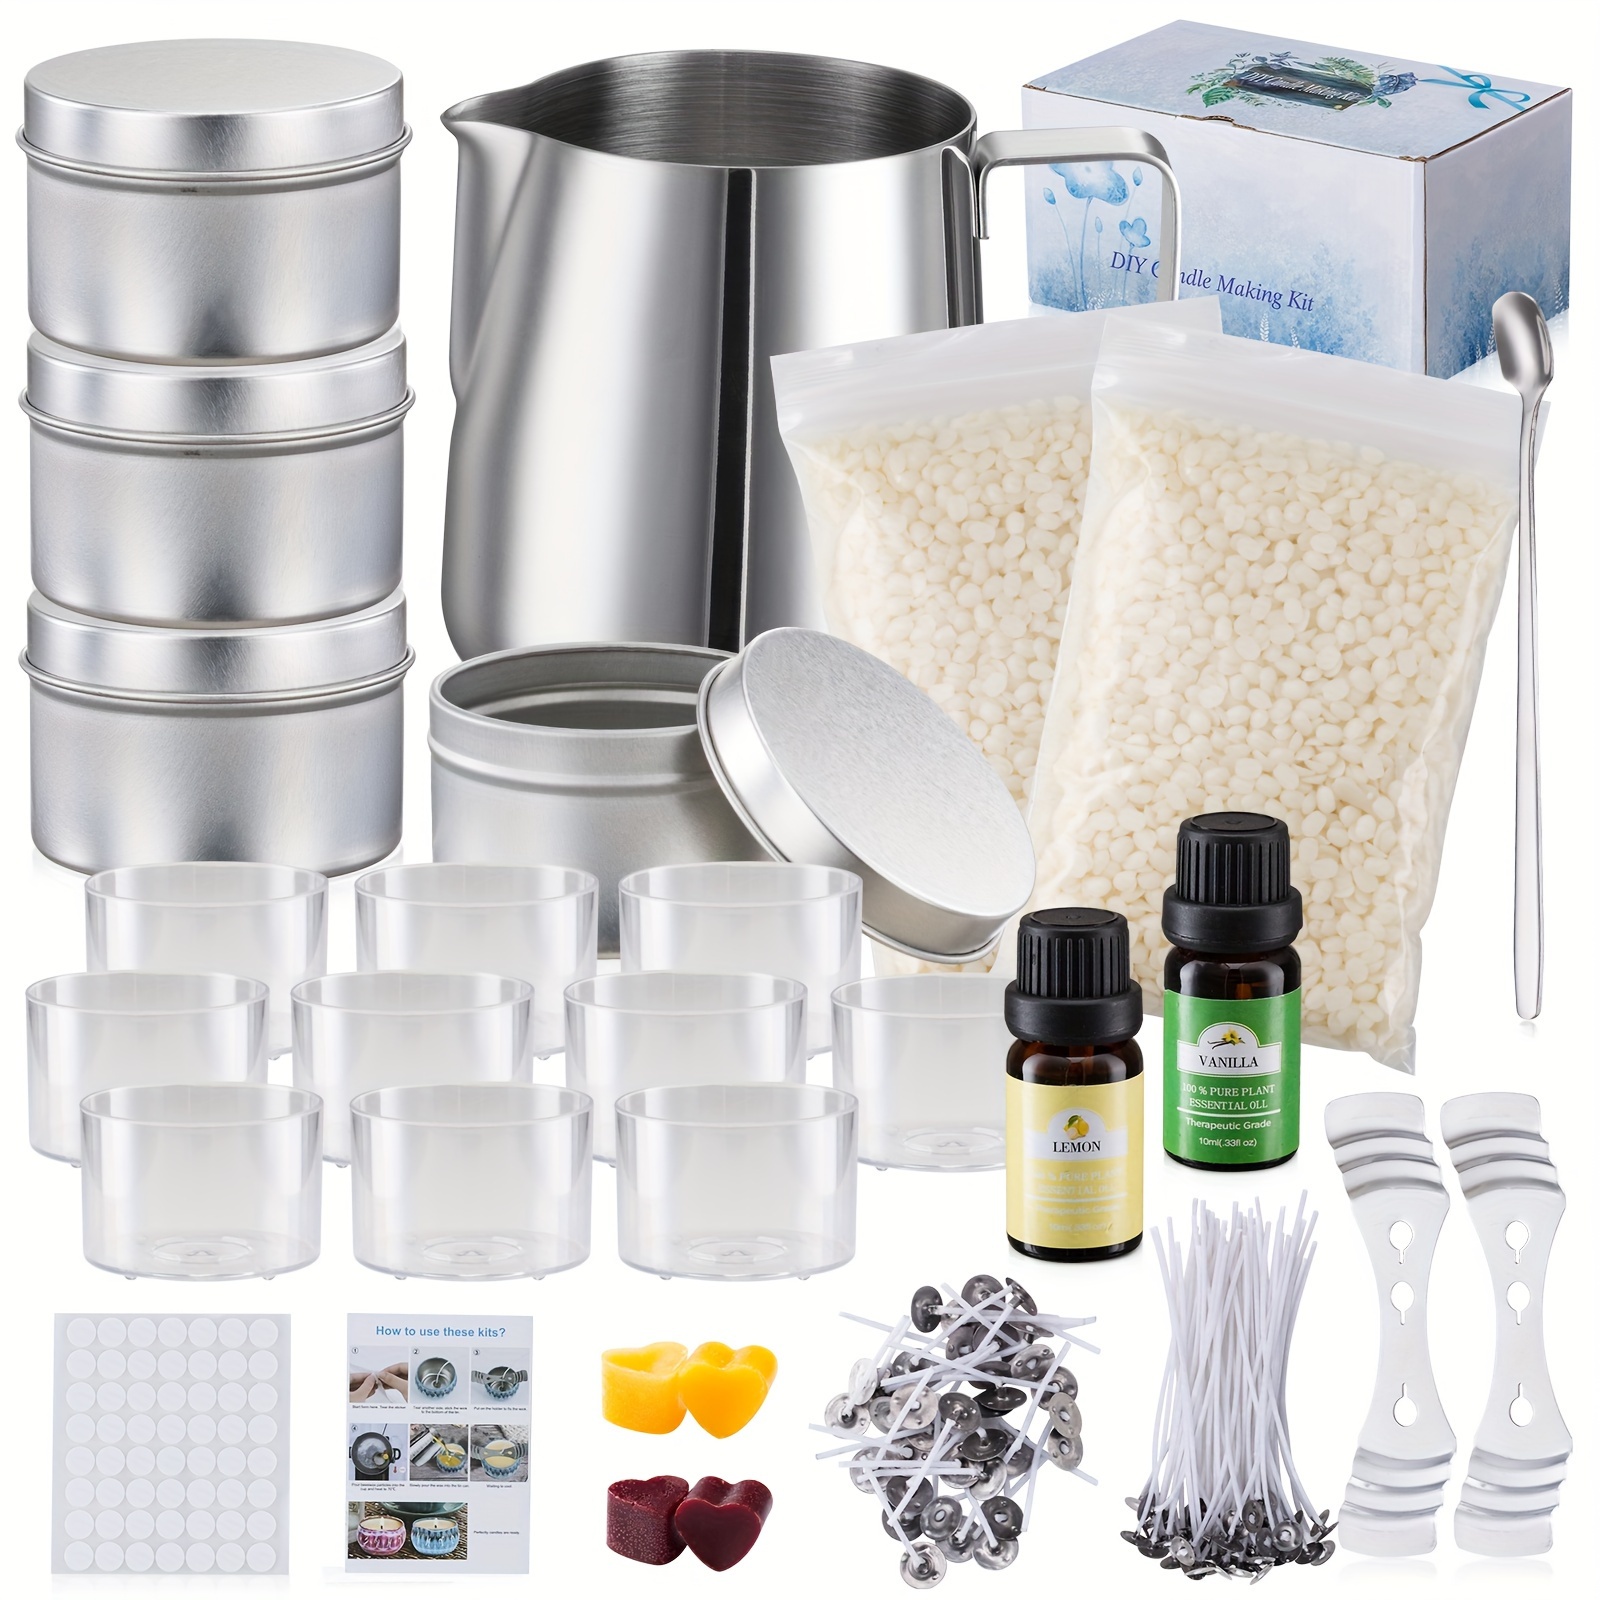 Candle Making Kit - Soy Wax Candle Making Set - Storage Box with